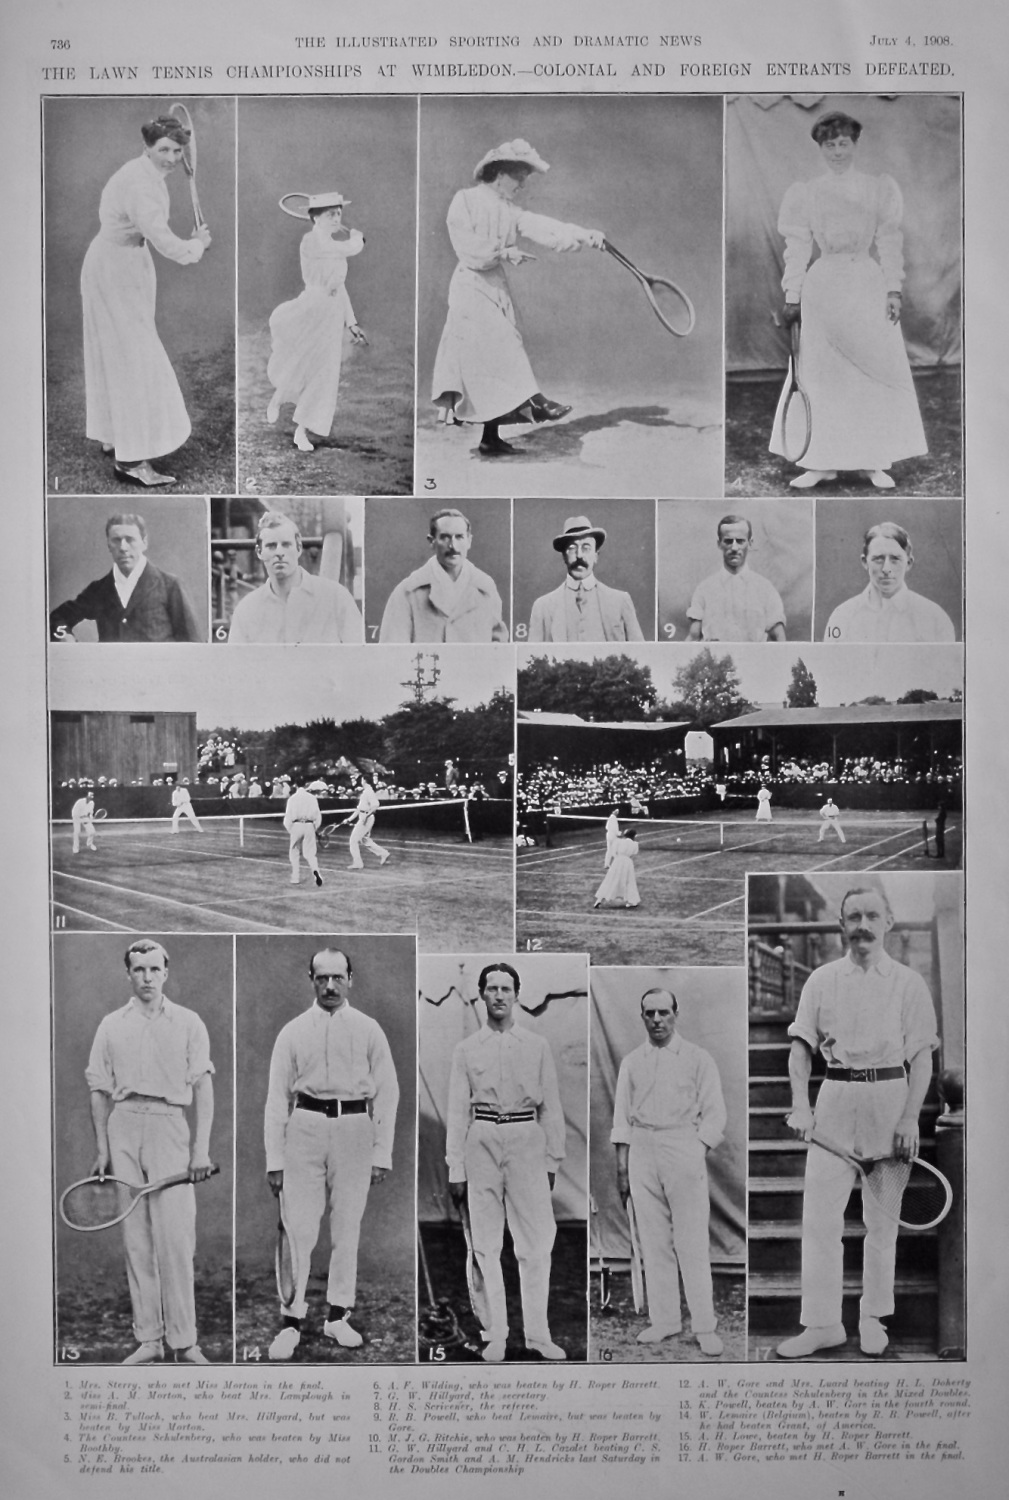 The Lawn Tennis Championships at Wimbledon.- Colonial and Foreign Entrants 